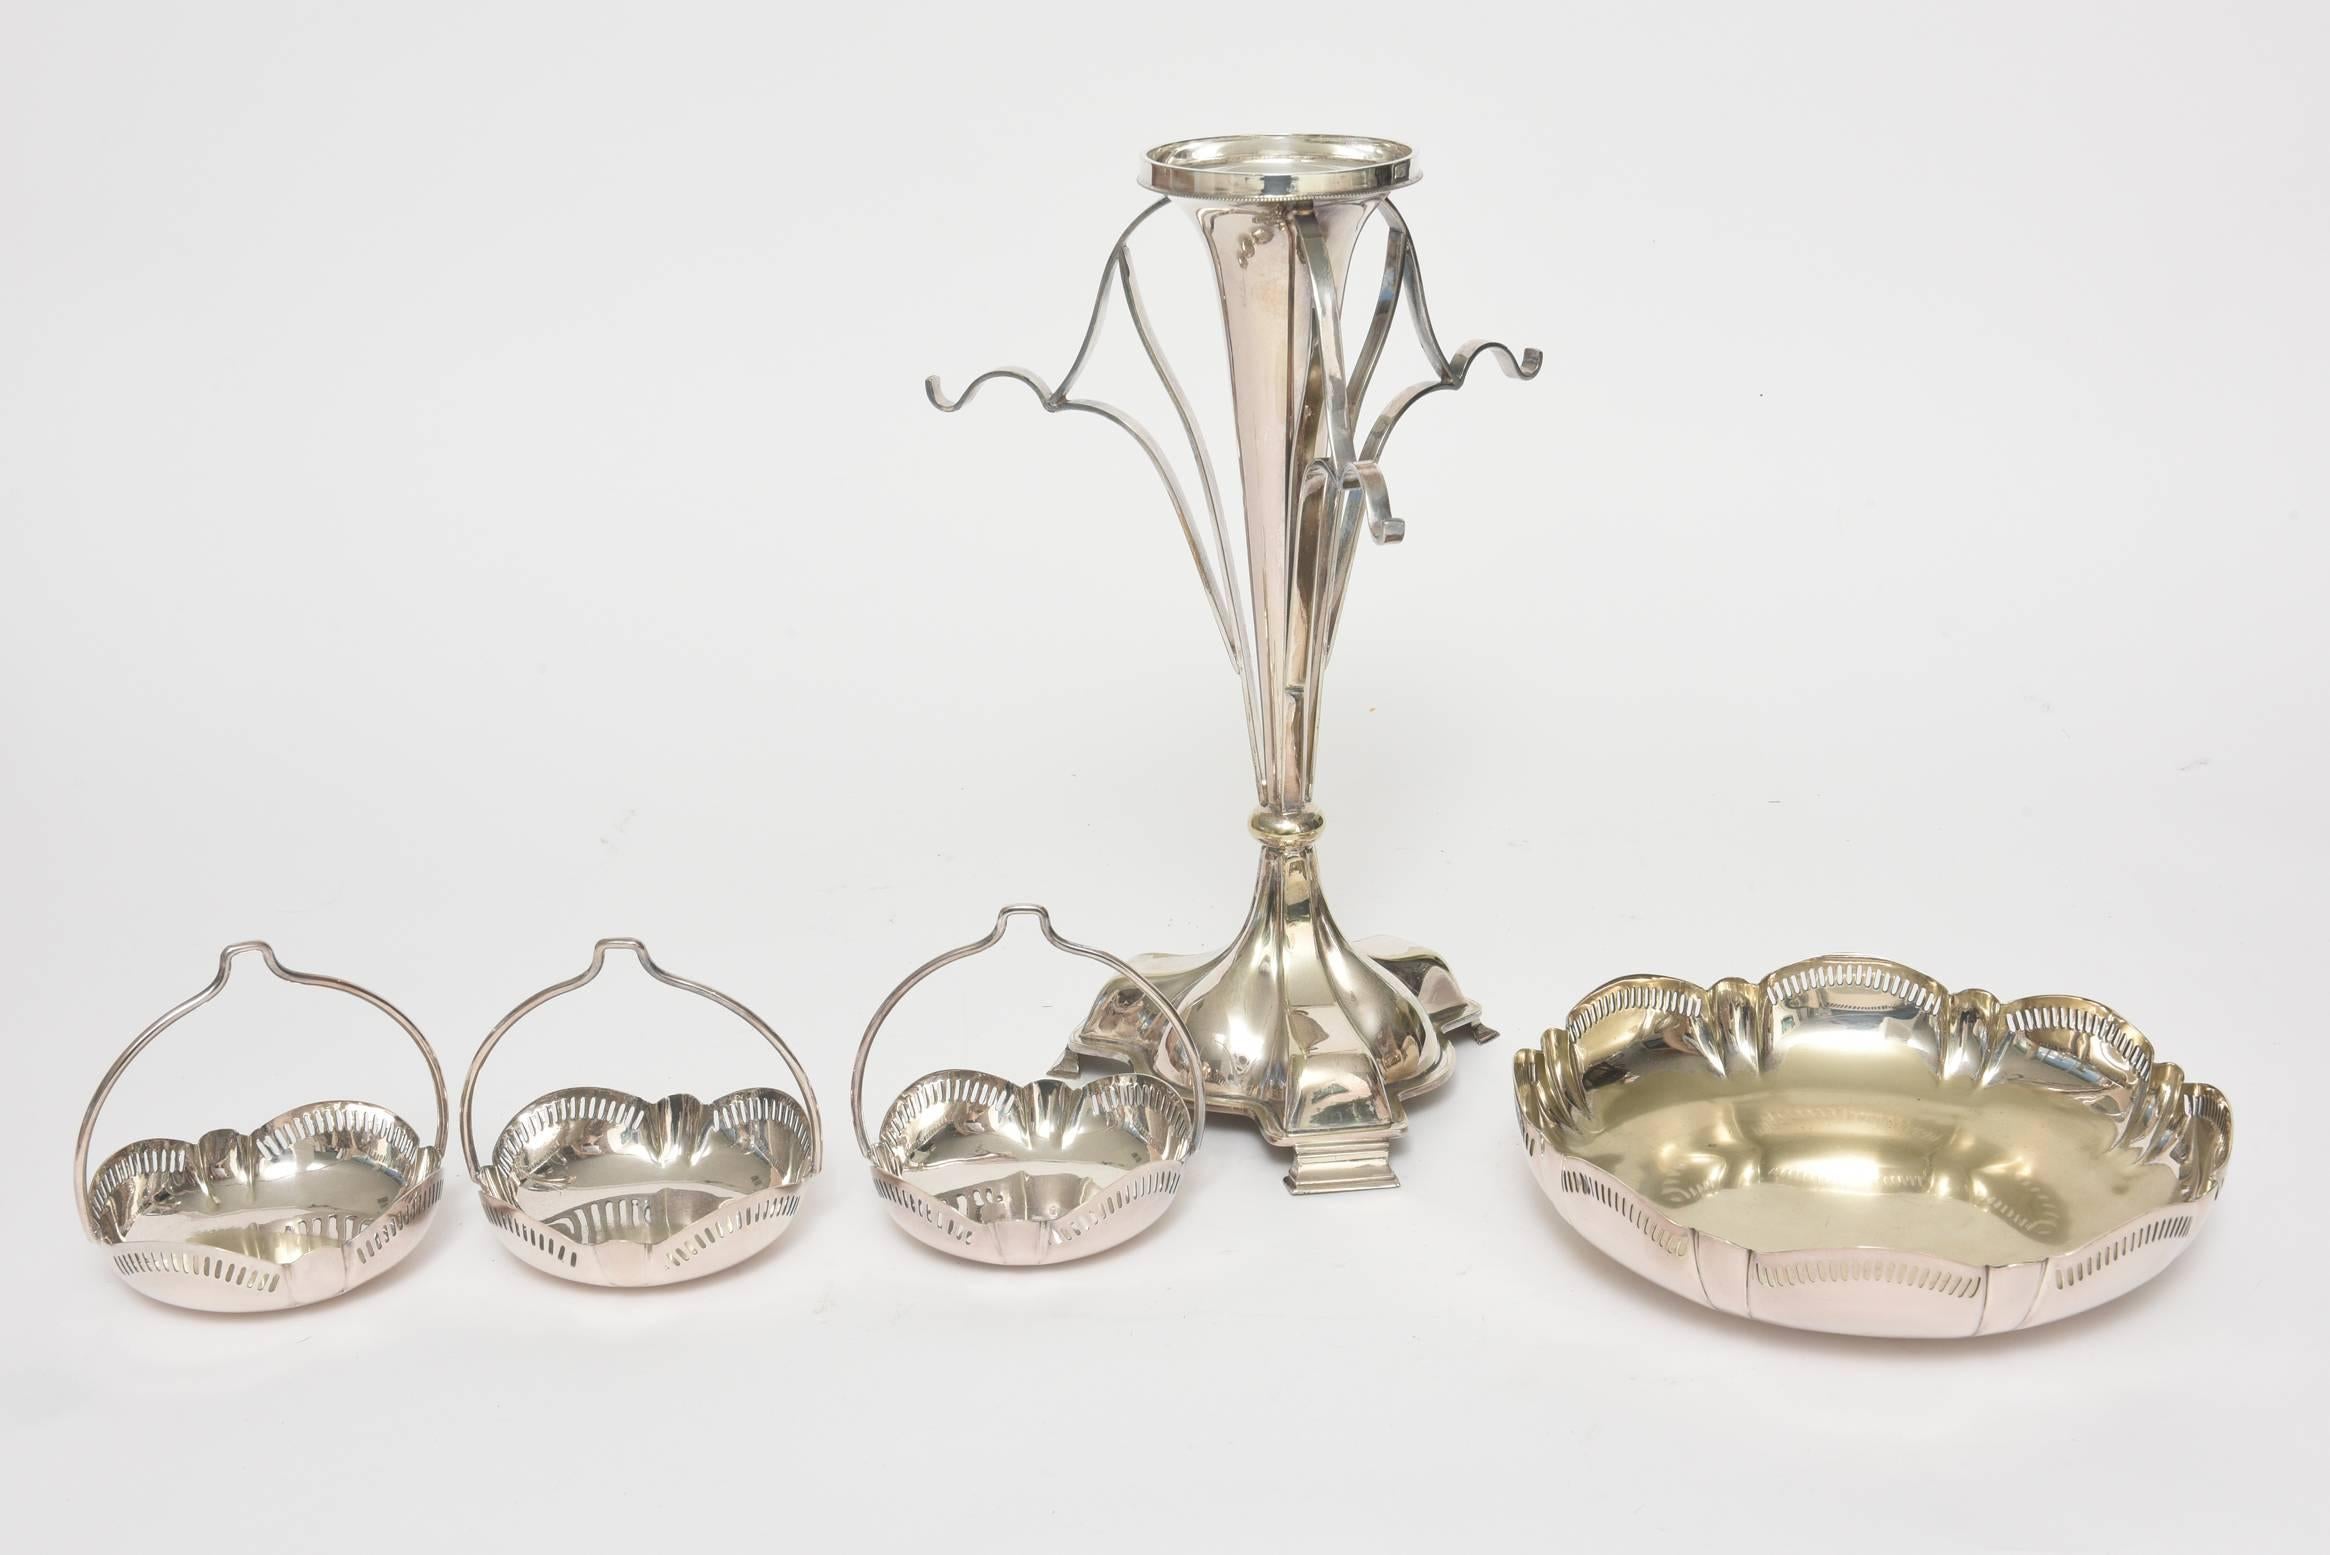 Antique Edwardian Silver Plate Epergne Centerpiece with Candy and Sweets Baskets 3